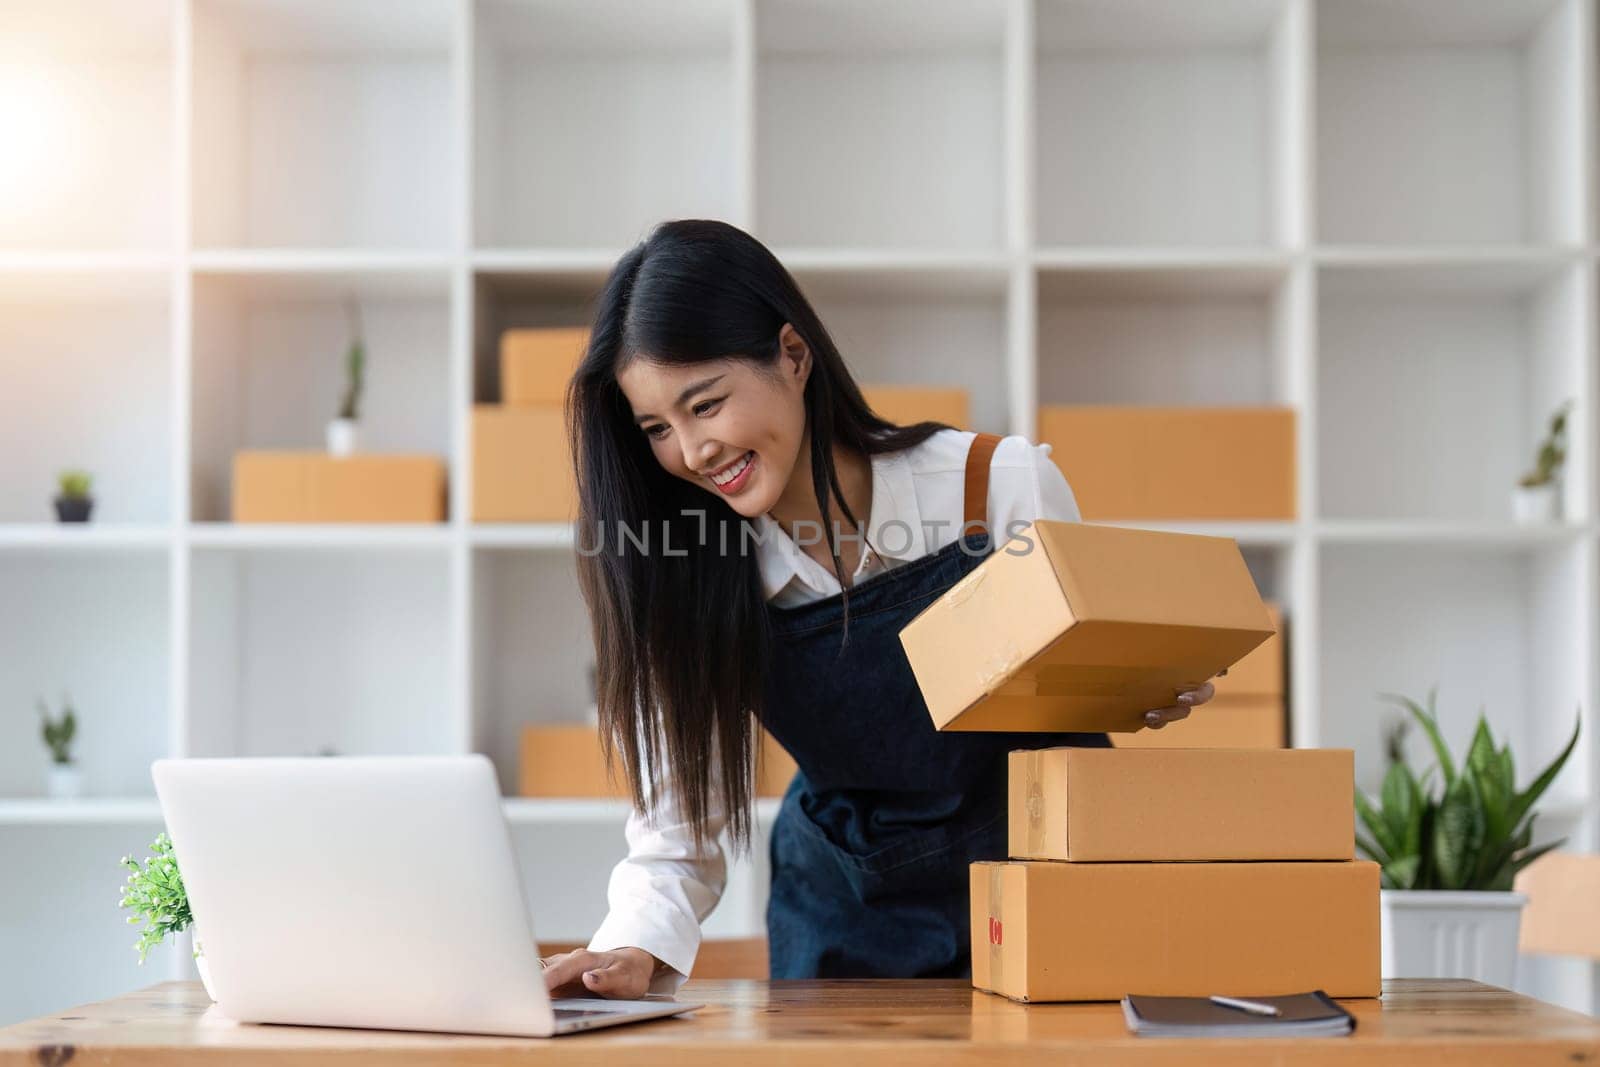 Startup SME small business entrepreneur of freelance Asian woman using laptop and box to receive and review orders online to prepare to pack sell to customers, online sme business ideas.